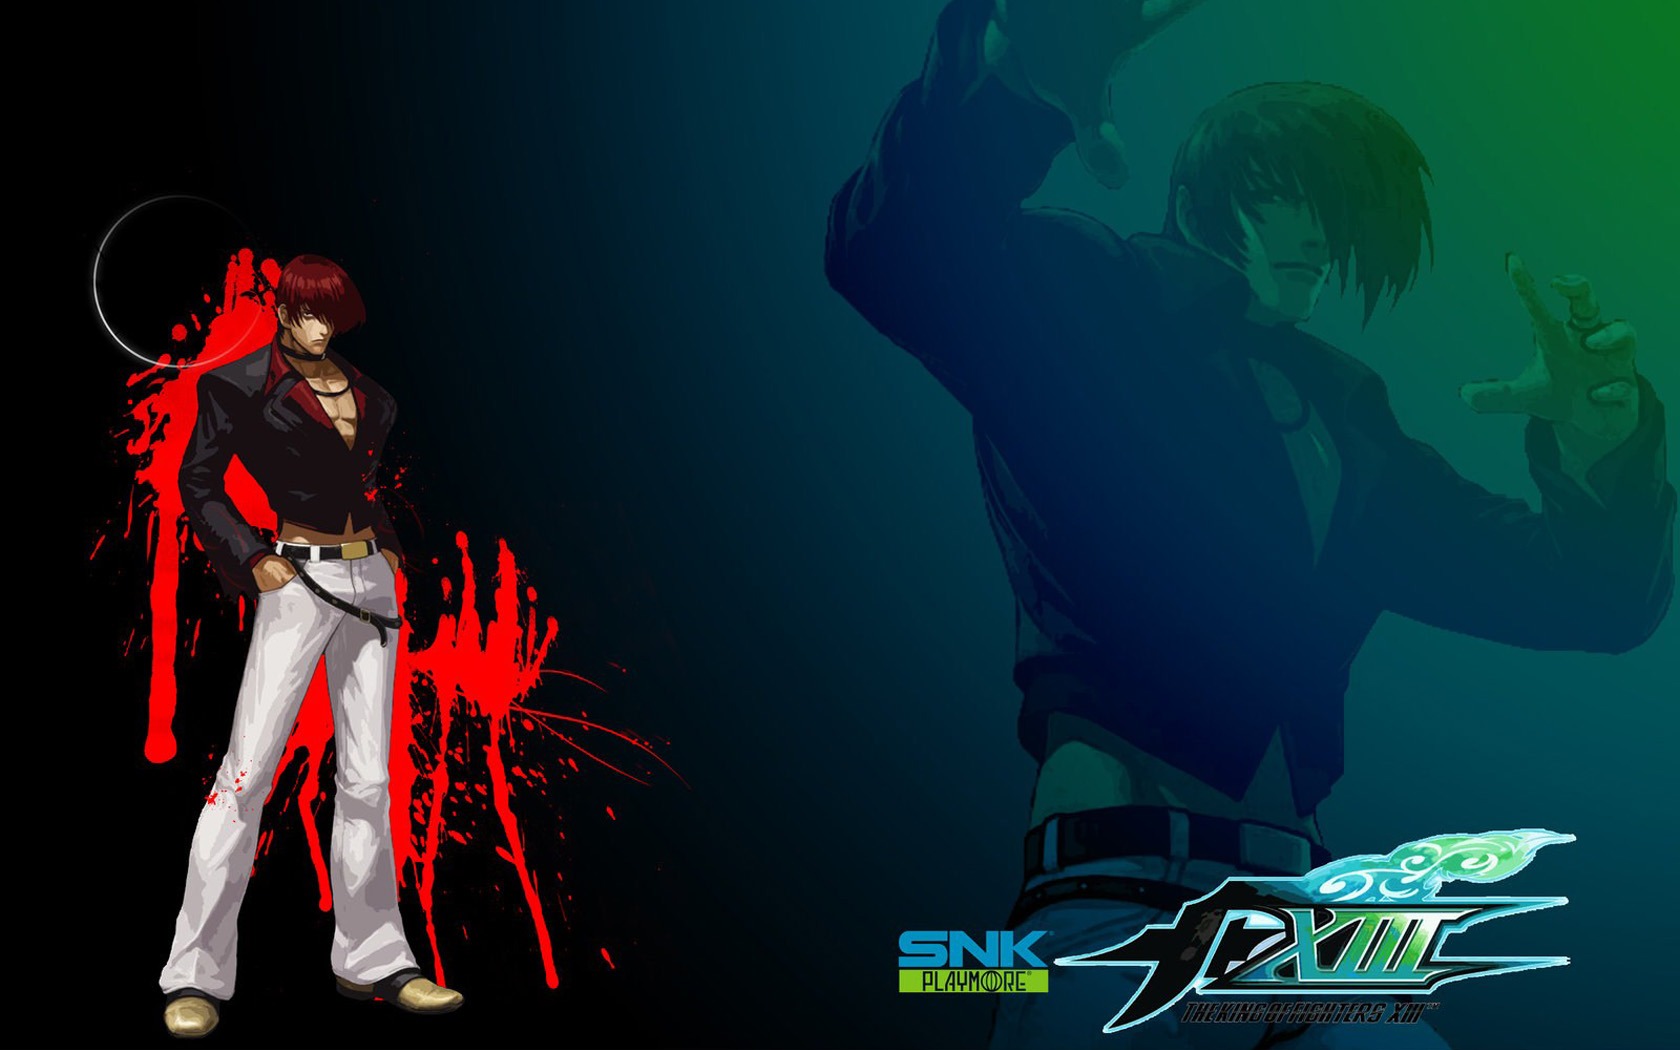 Le roi de wallpapers Fighters XIII #12 - 1680x1050